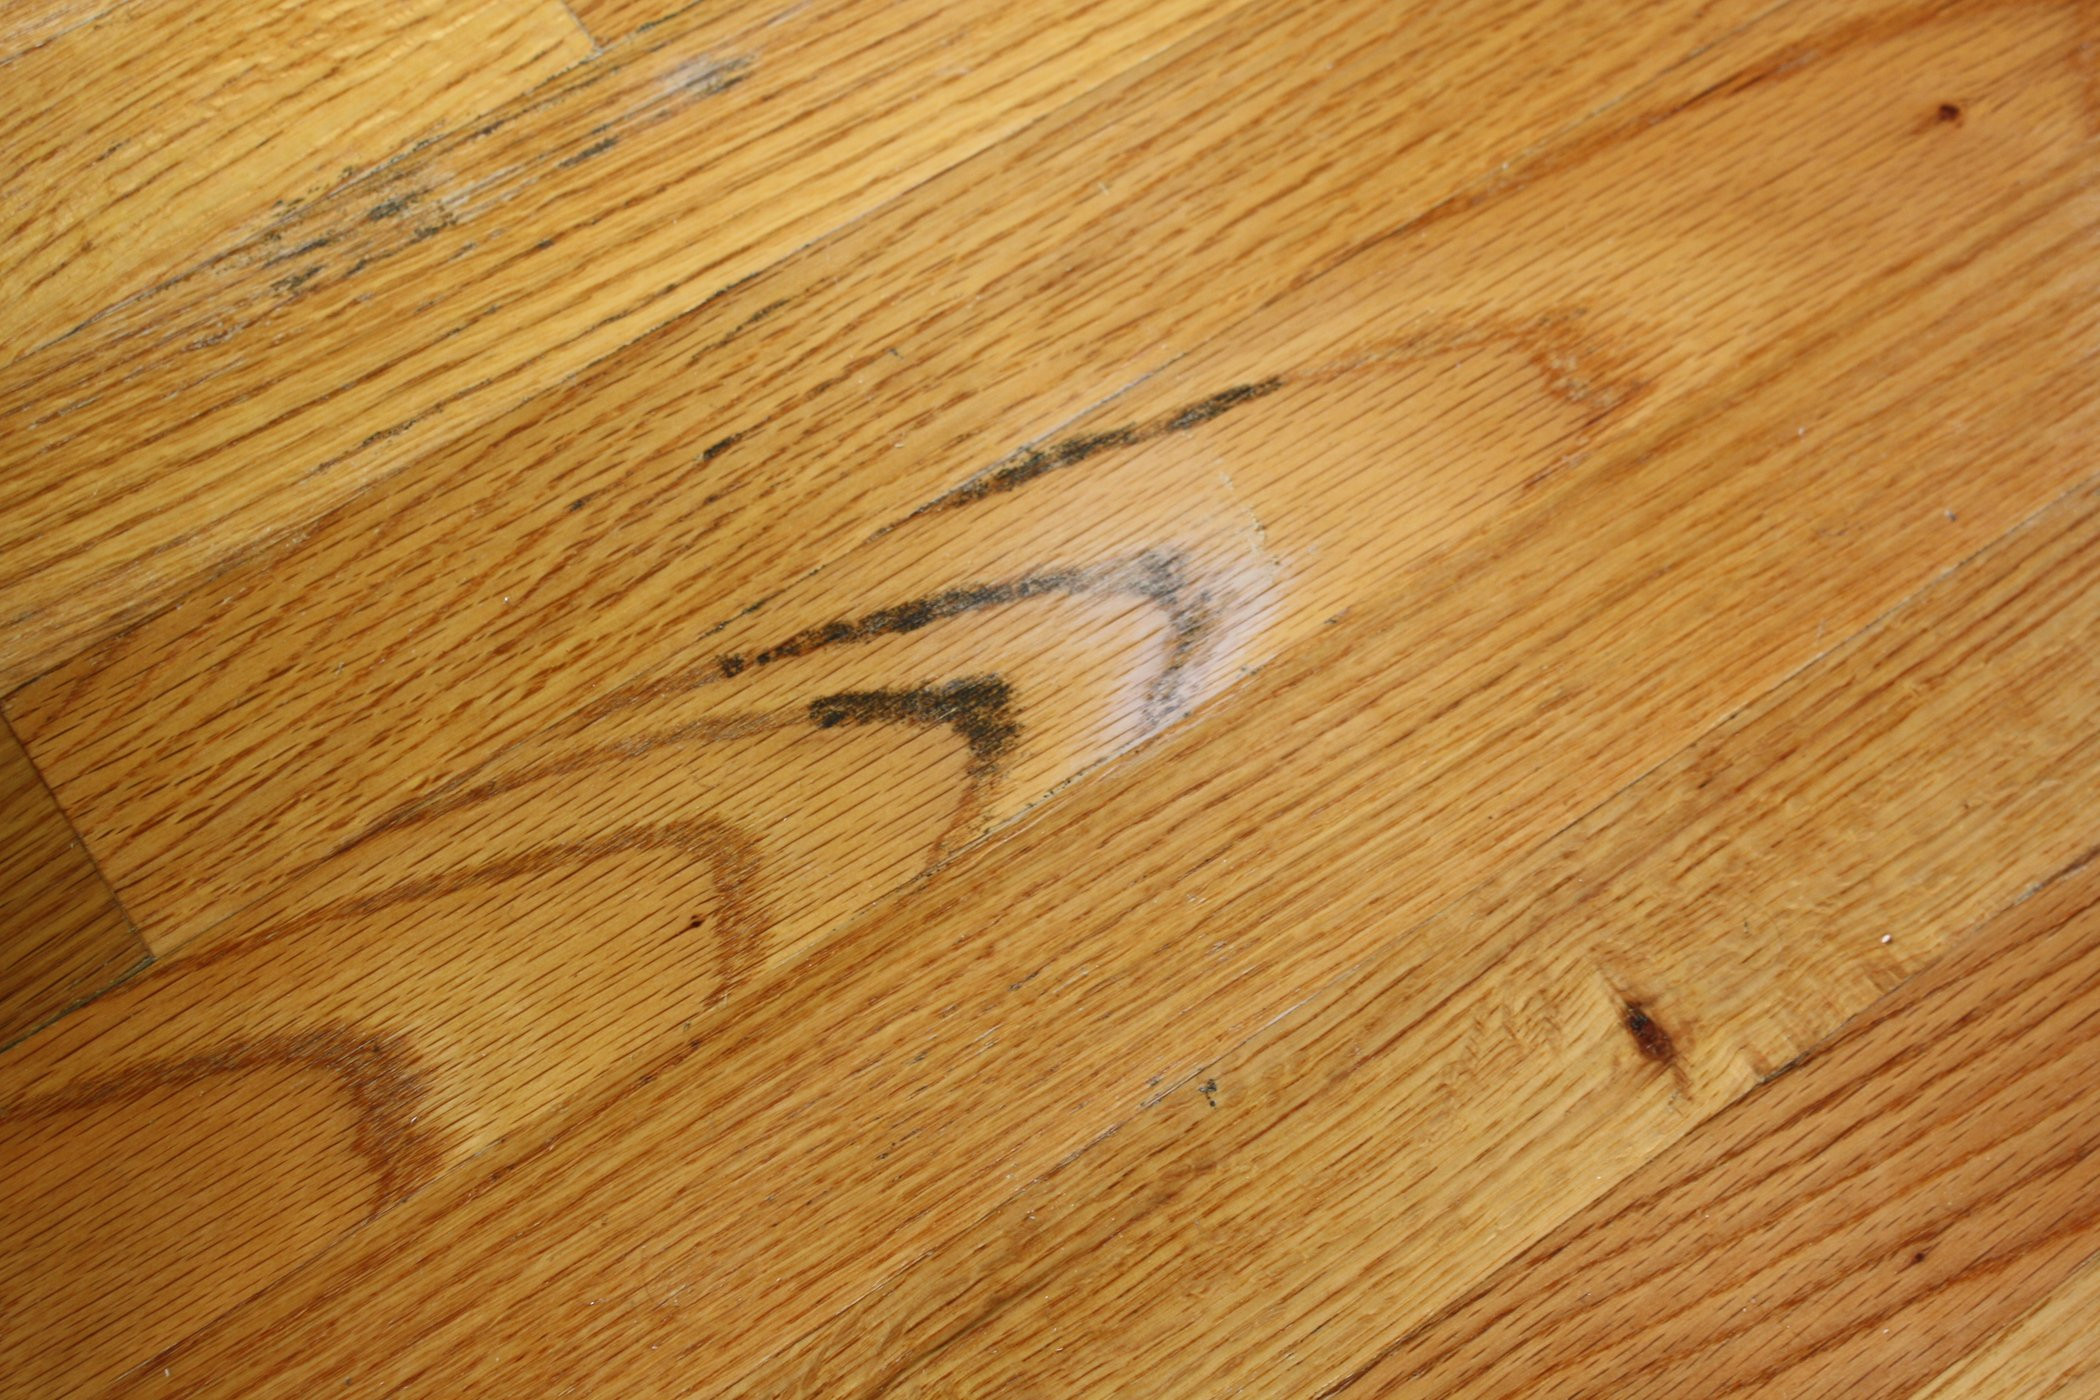 problems with hickory hardwood flooring of how to clean mold from a wood floor 4 steps regarding fylcmqyg7dyp6ds